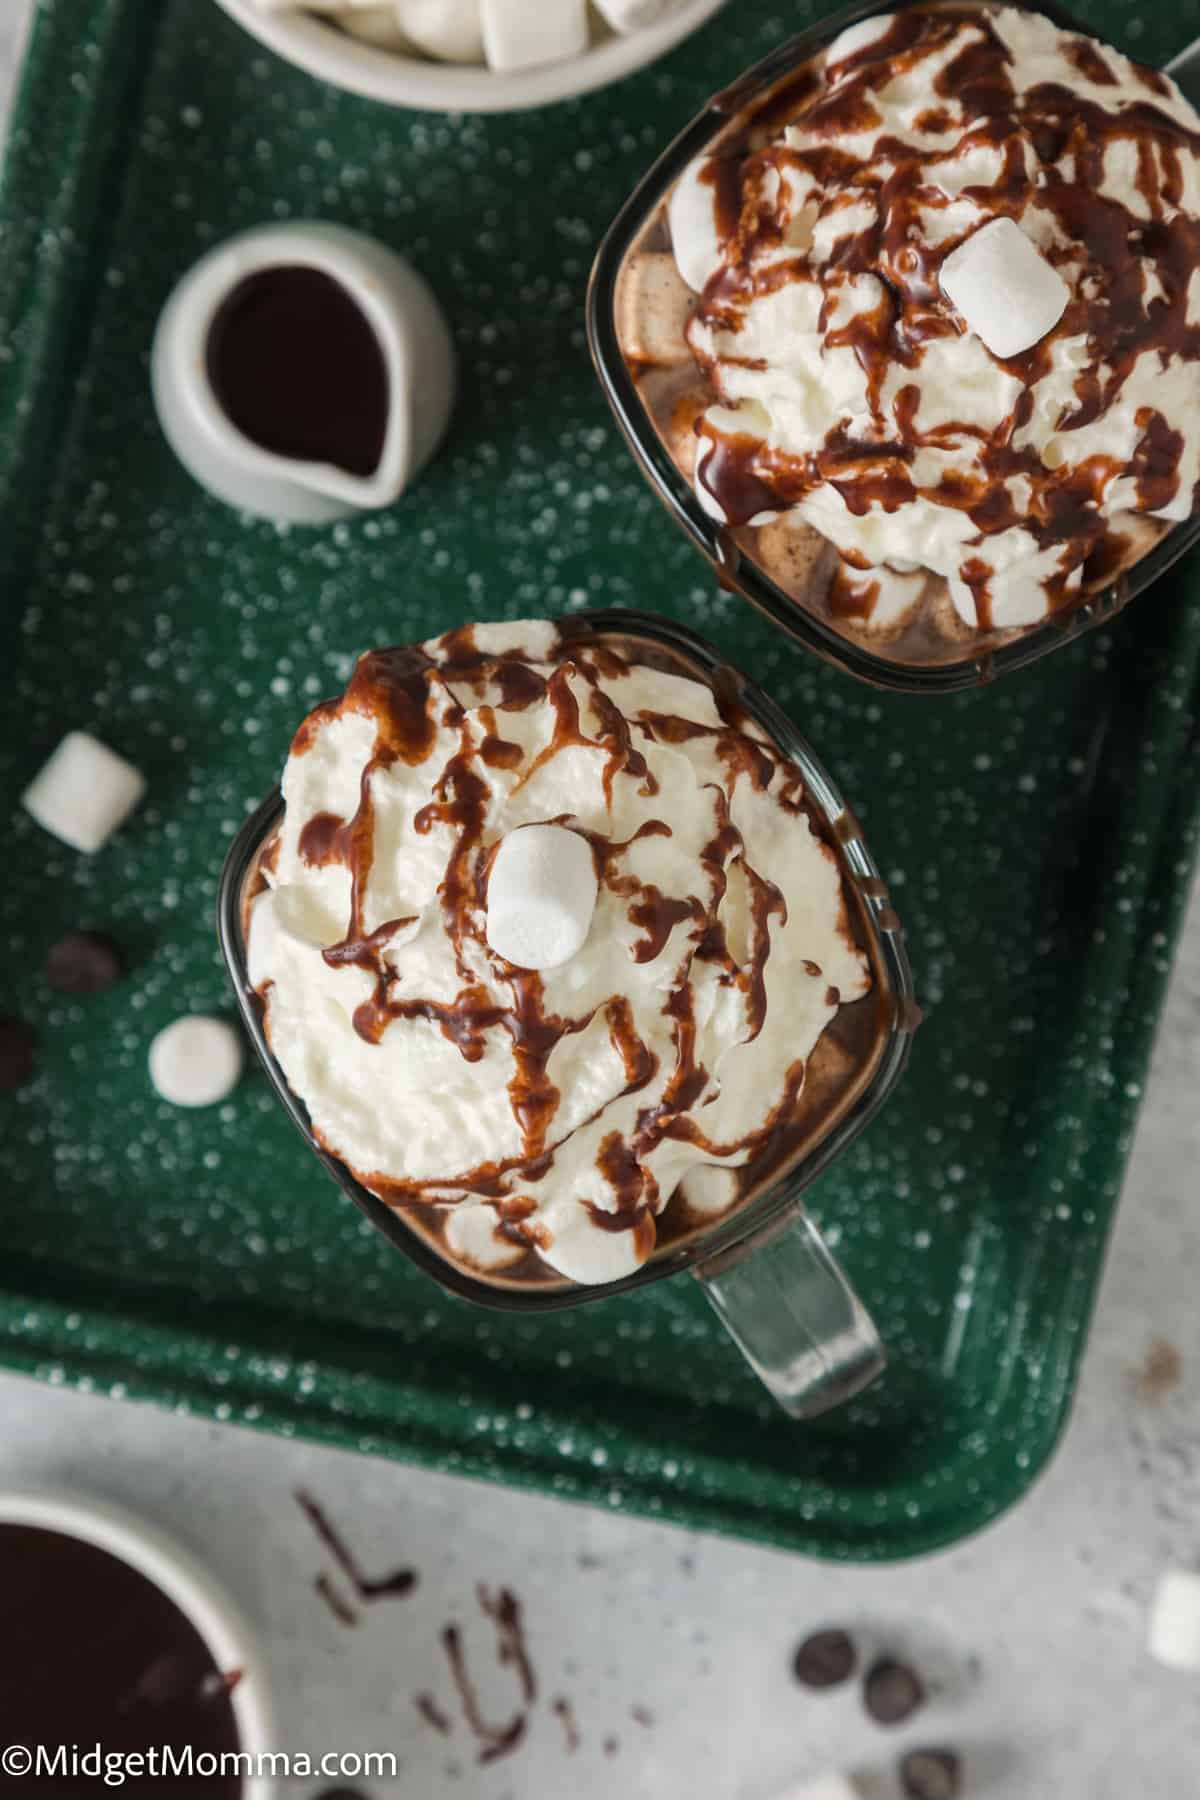 2 cups of Boozy Hot Chocolate on a tray